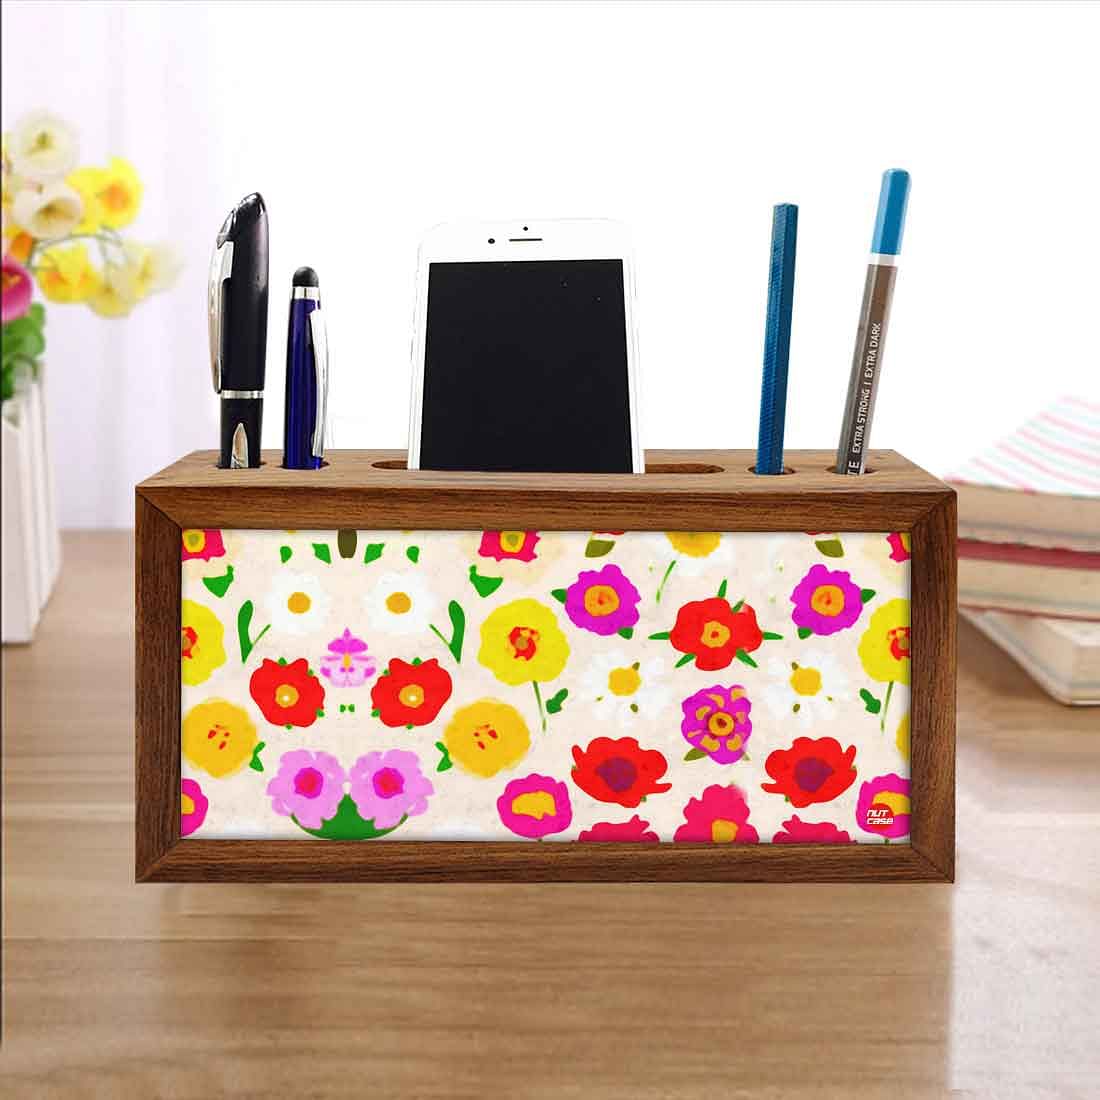 Wooden Table Organizer Pen Mobile Stand - Pretty Little Flowers Nutcase